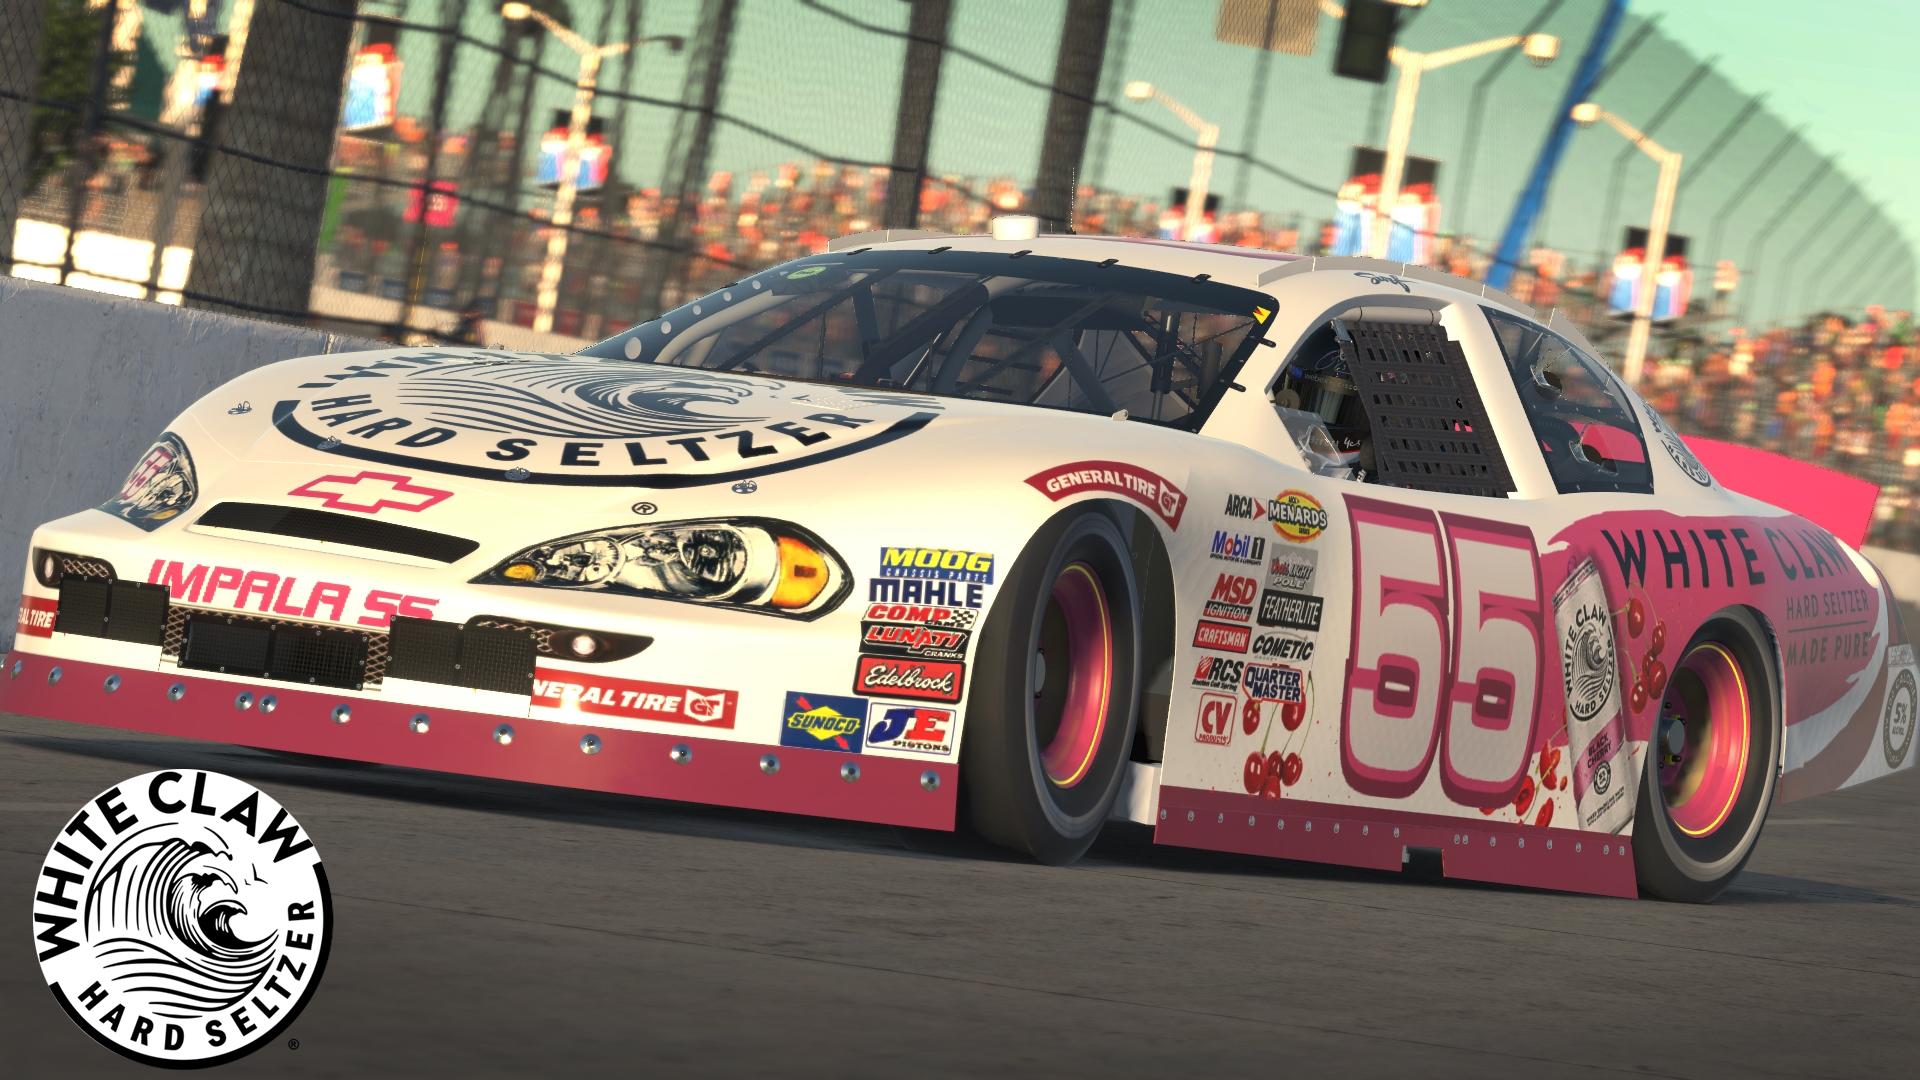 Preview of White Claw Black Cherry NASCAR Chevy Impala by Ethan Leimann